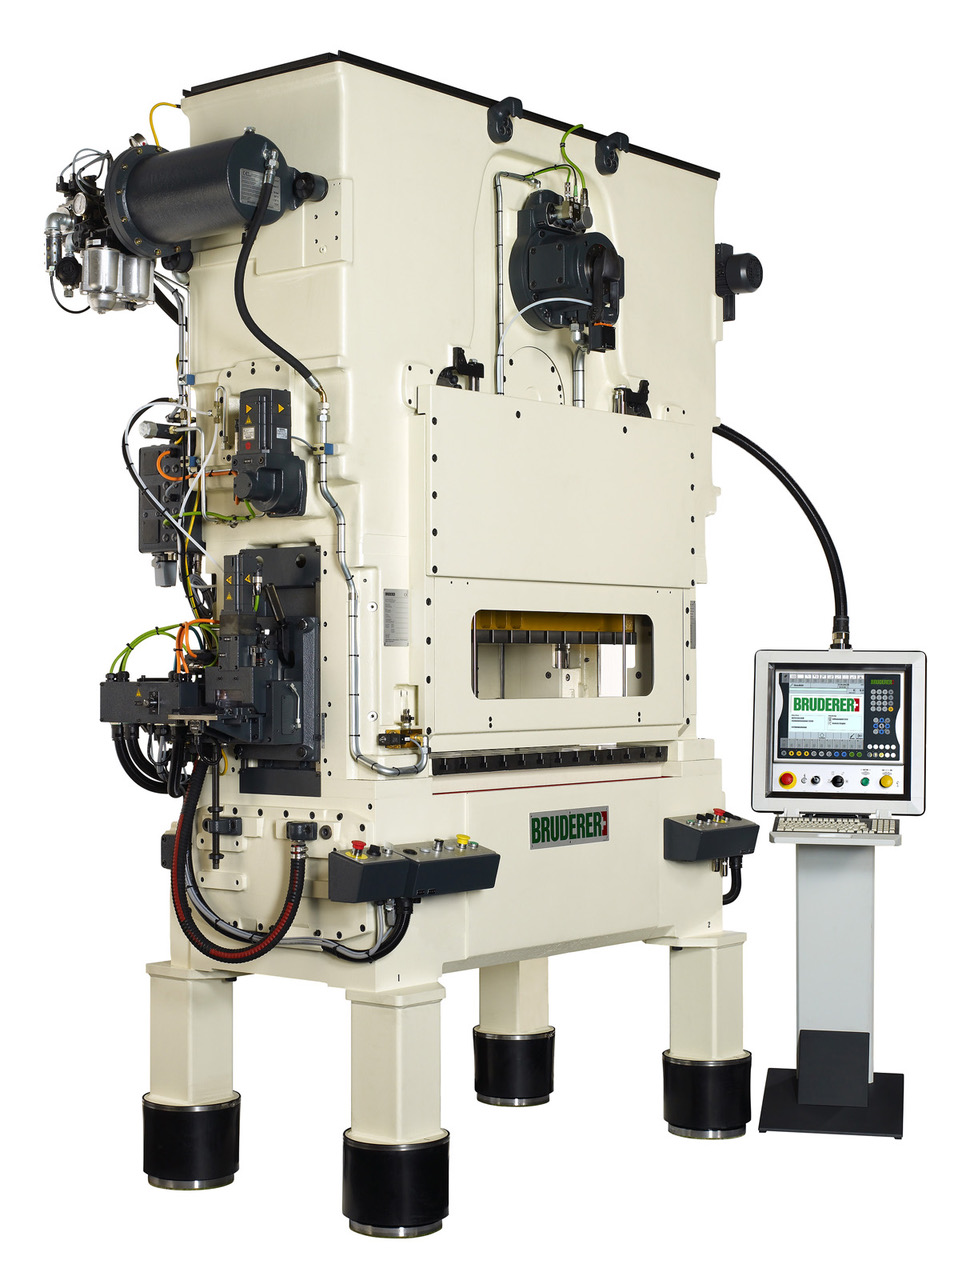 The company range is focused on the BSTA series with a nominal force of 18 to 250 tonnes and a stroke rate range of between 1 to 3000 strokes per minute.